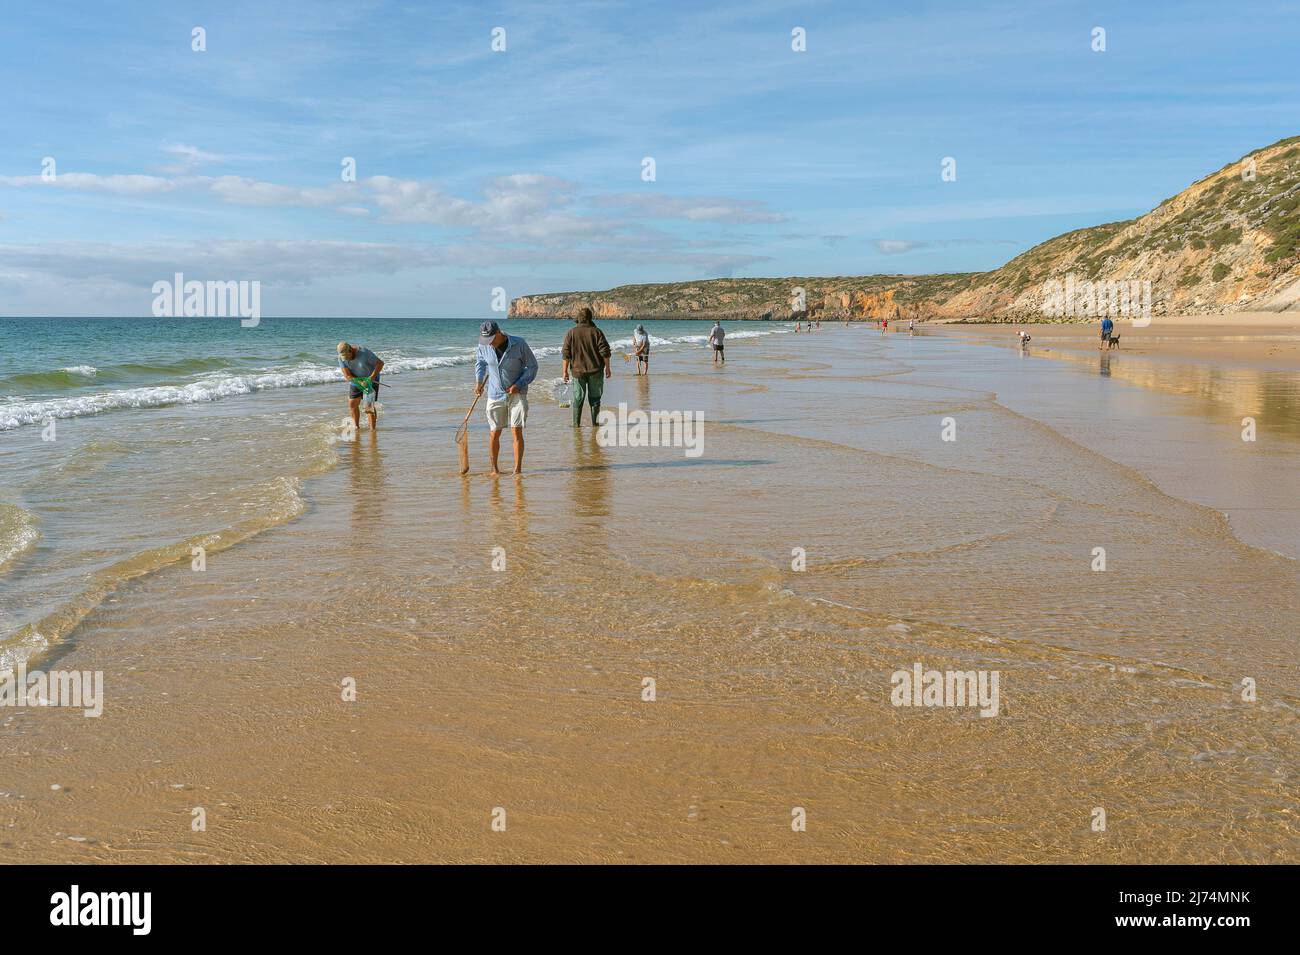 People fishing worms, crabs and other crustaceans, Portugal, Algarve Stock Photo